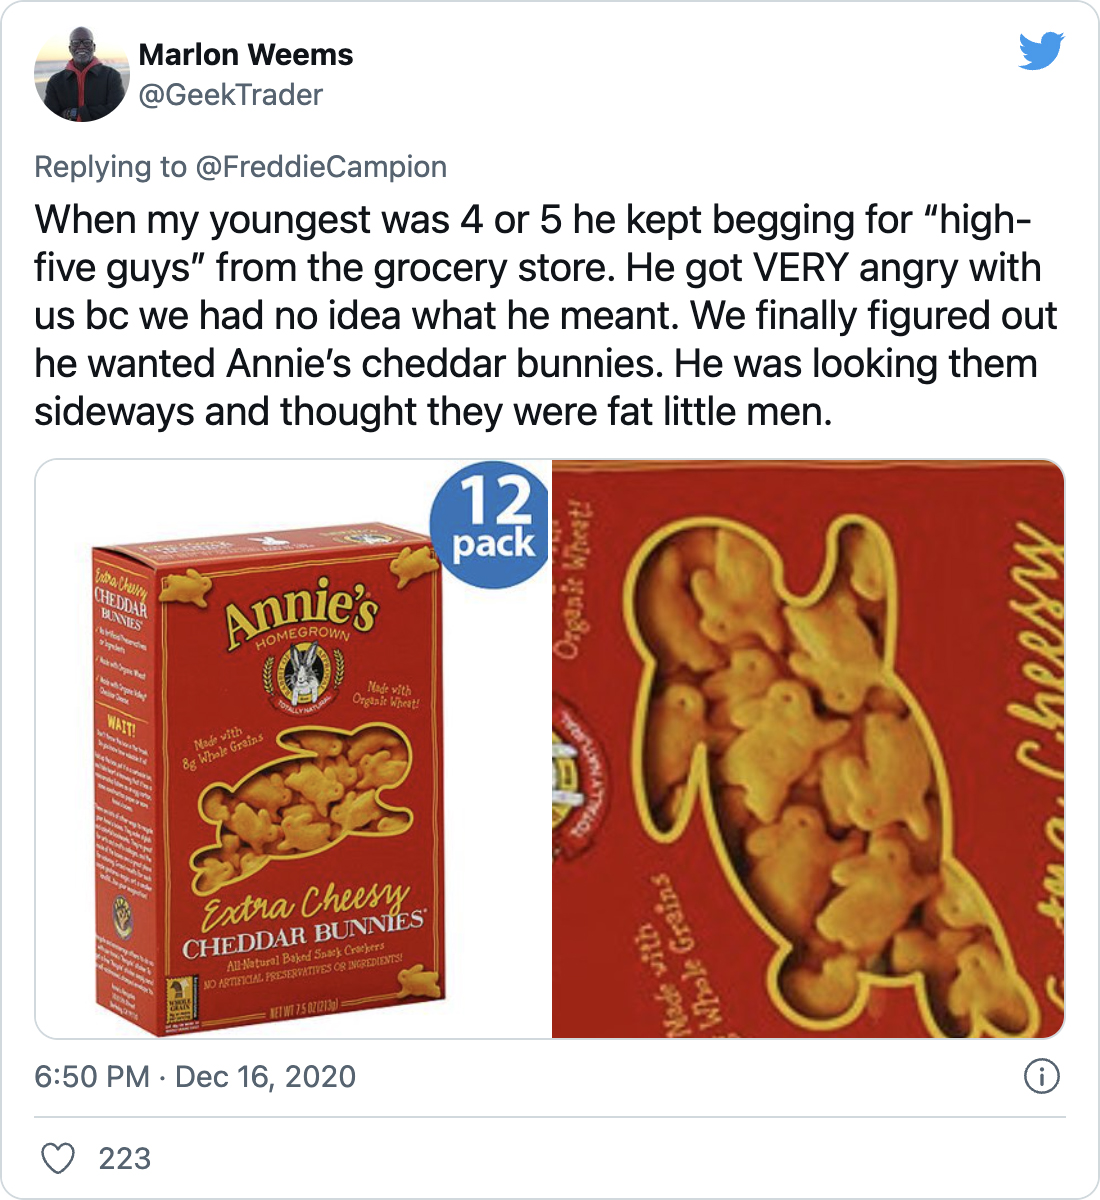 When my youngest was 4 or 5 he kept begging for “high-five guys” from the grocery store. He got VERY angry with us bc we had no idea what he meant. We finally figured out he wanted Annie’s cheddar bunnies. He was looking them sideways and thought they were fat little men. - @GeekTrader